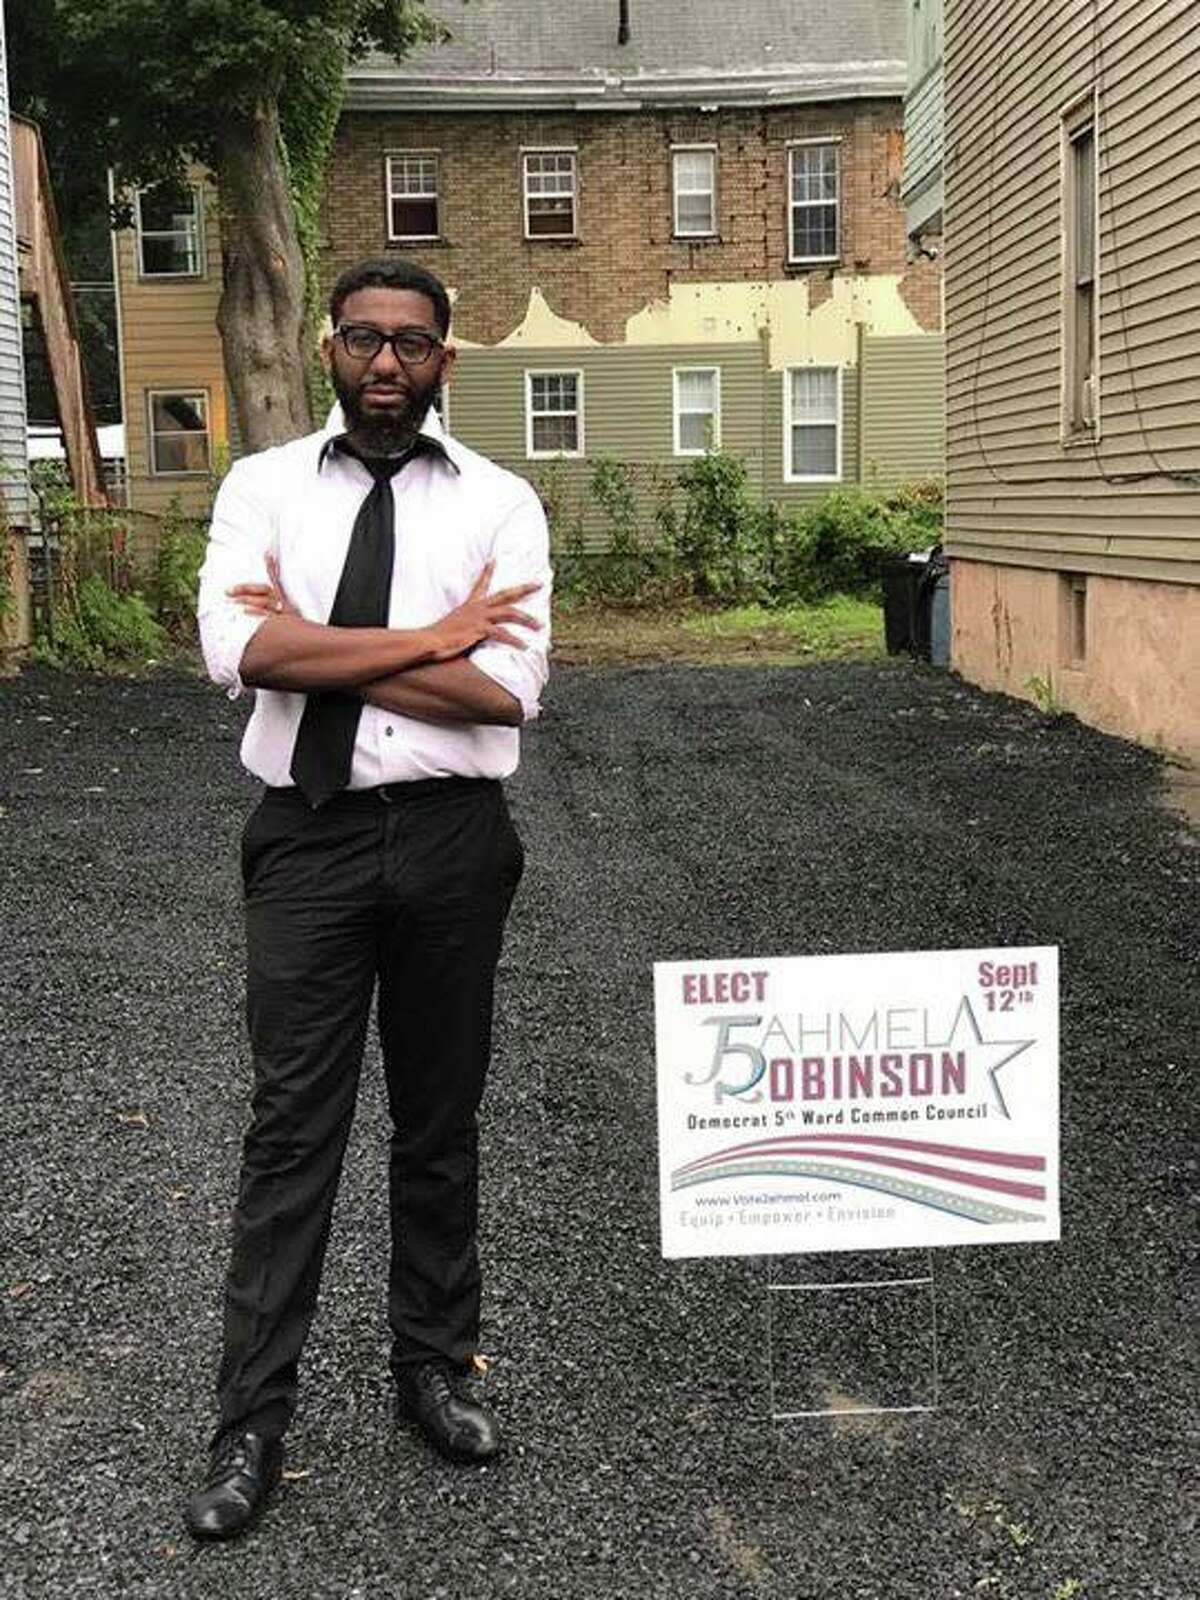 Jahmel Robinson wins Albany's 5th Ward council seat with 100 absentee ballot votes. (Courtesy photo) ORG XMIT: hRm8LxPwun1cgrBiLi3R